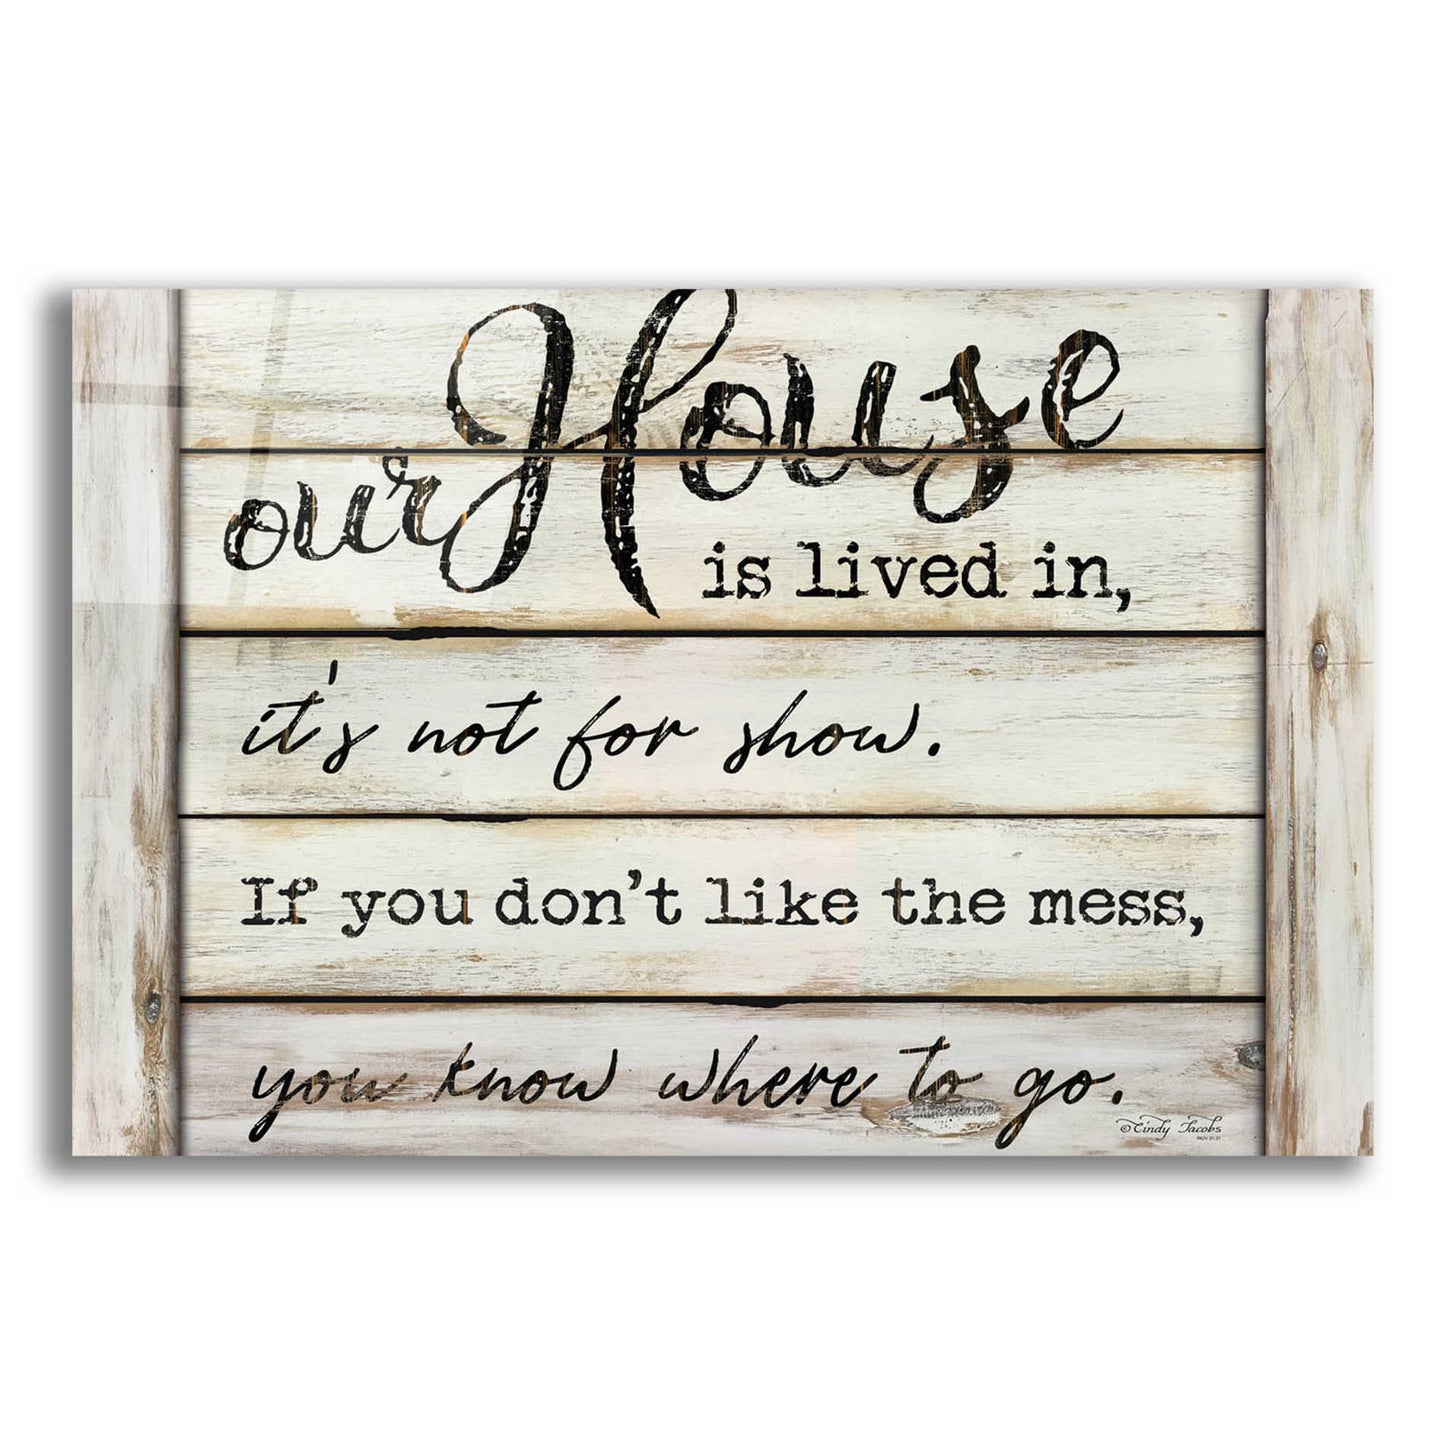 Epic Art 'Our House is Lived In' by Cindy Jacobs, Acrylic Glass Wall Art